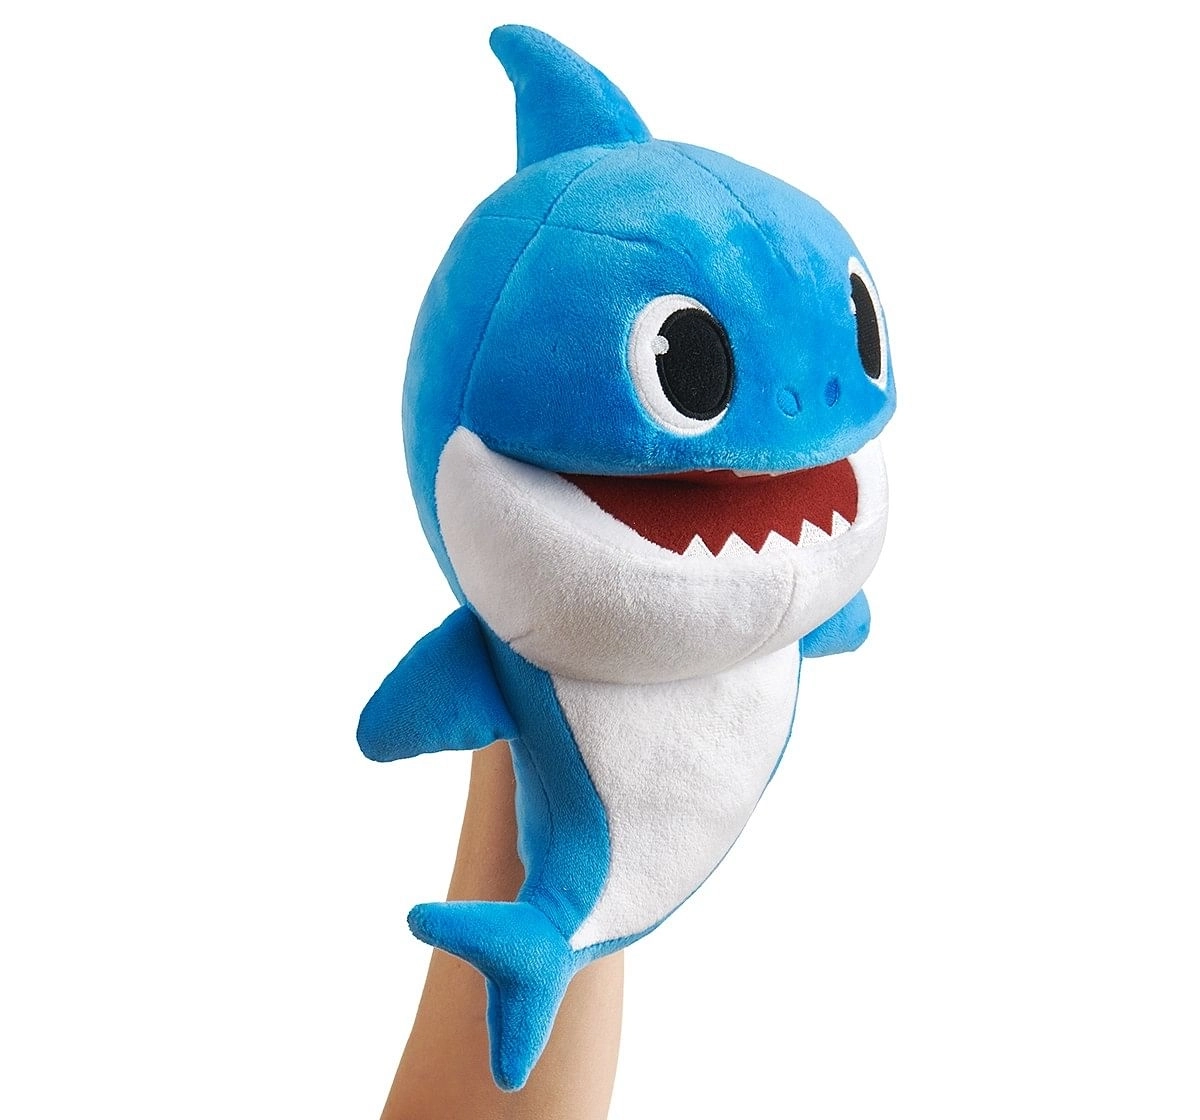 Pinkfong Shark Family Plush Puppet - Daddy Shark for Kids age 3Y+